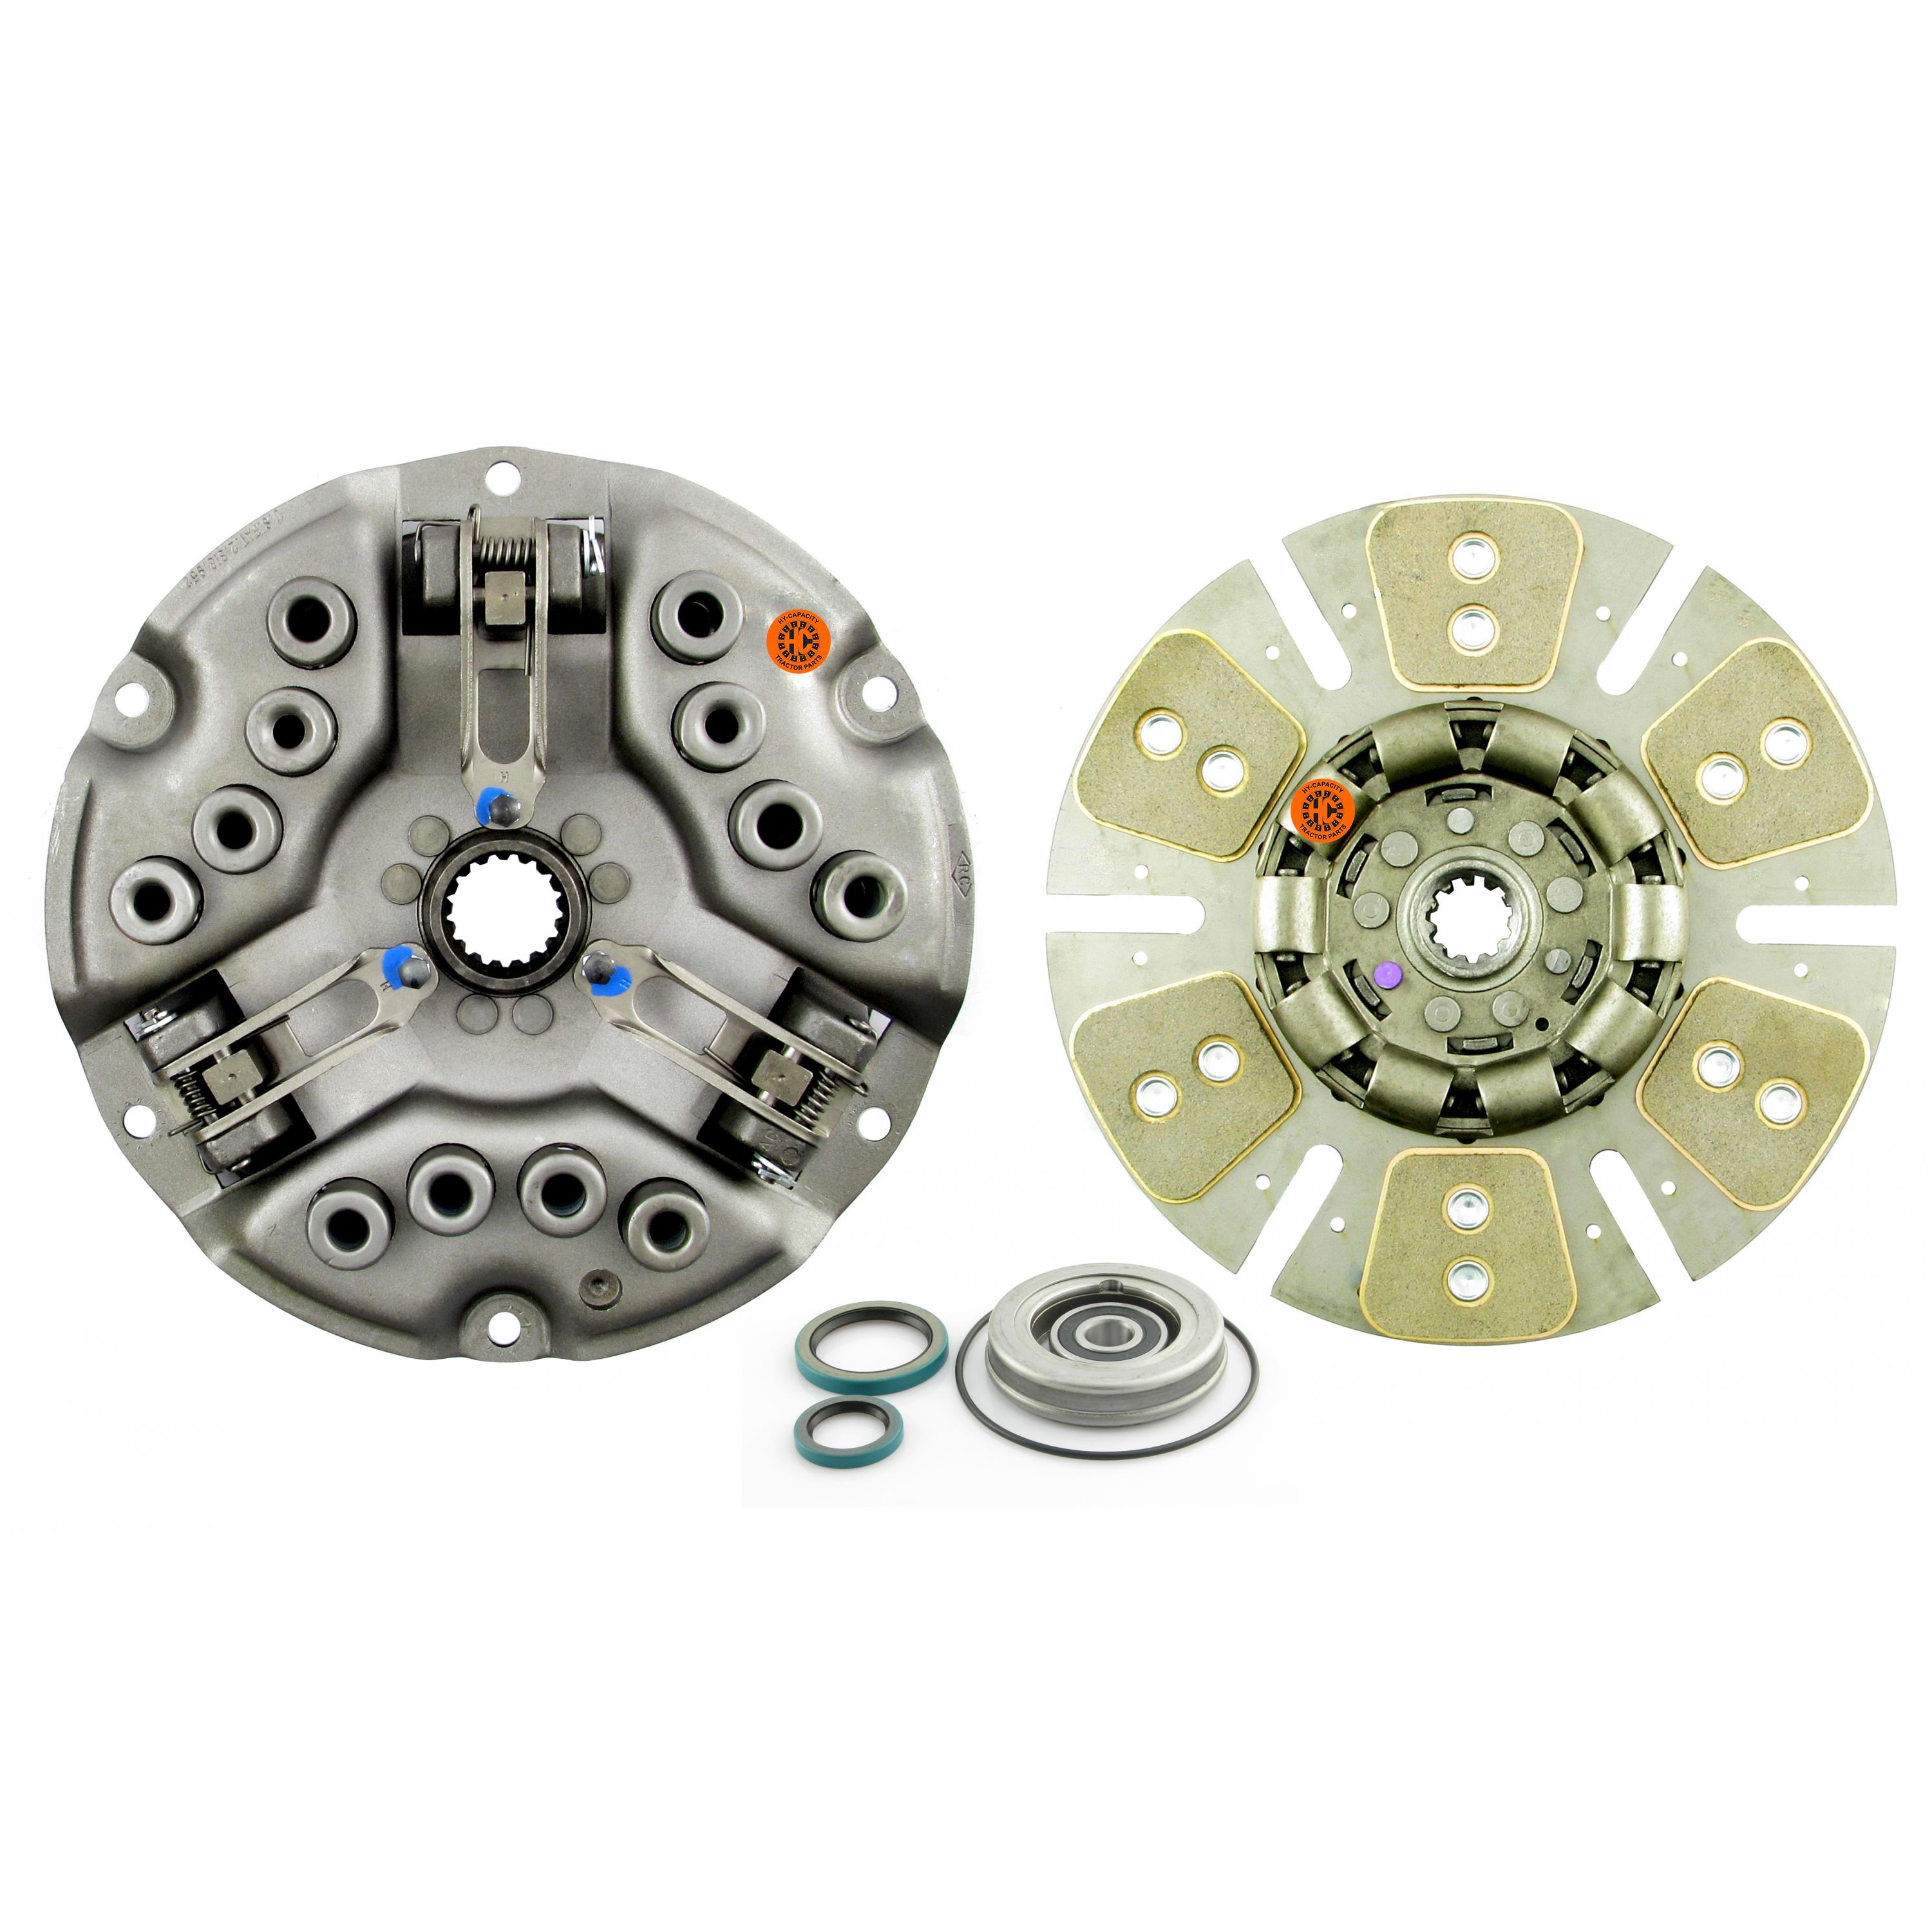 12" Single Stage Clutch Kit, w/ 6 Large Pad Disc, Bearings & Seals - Reman